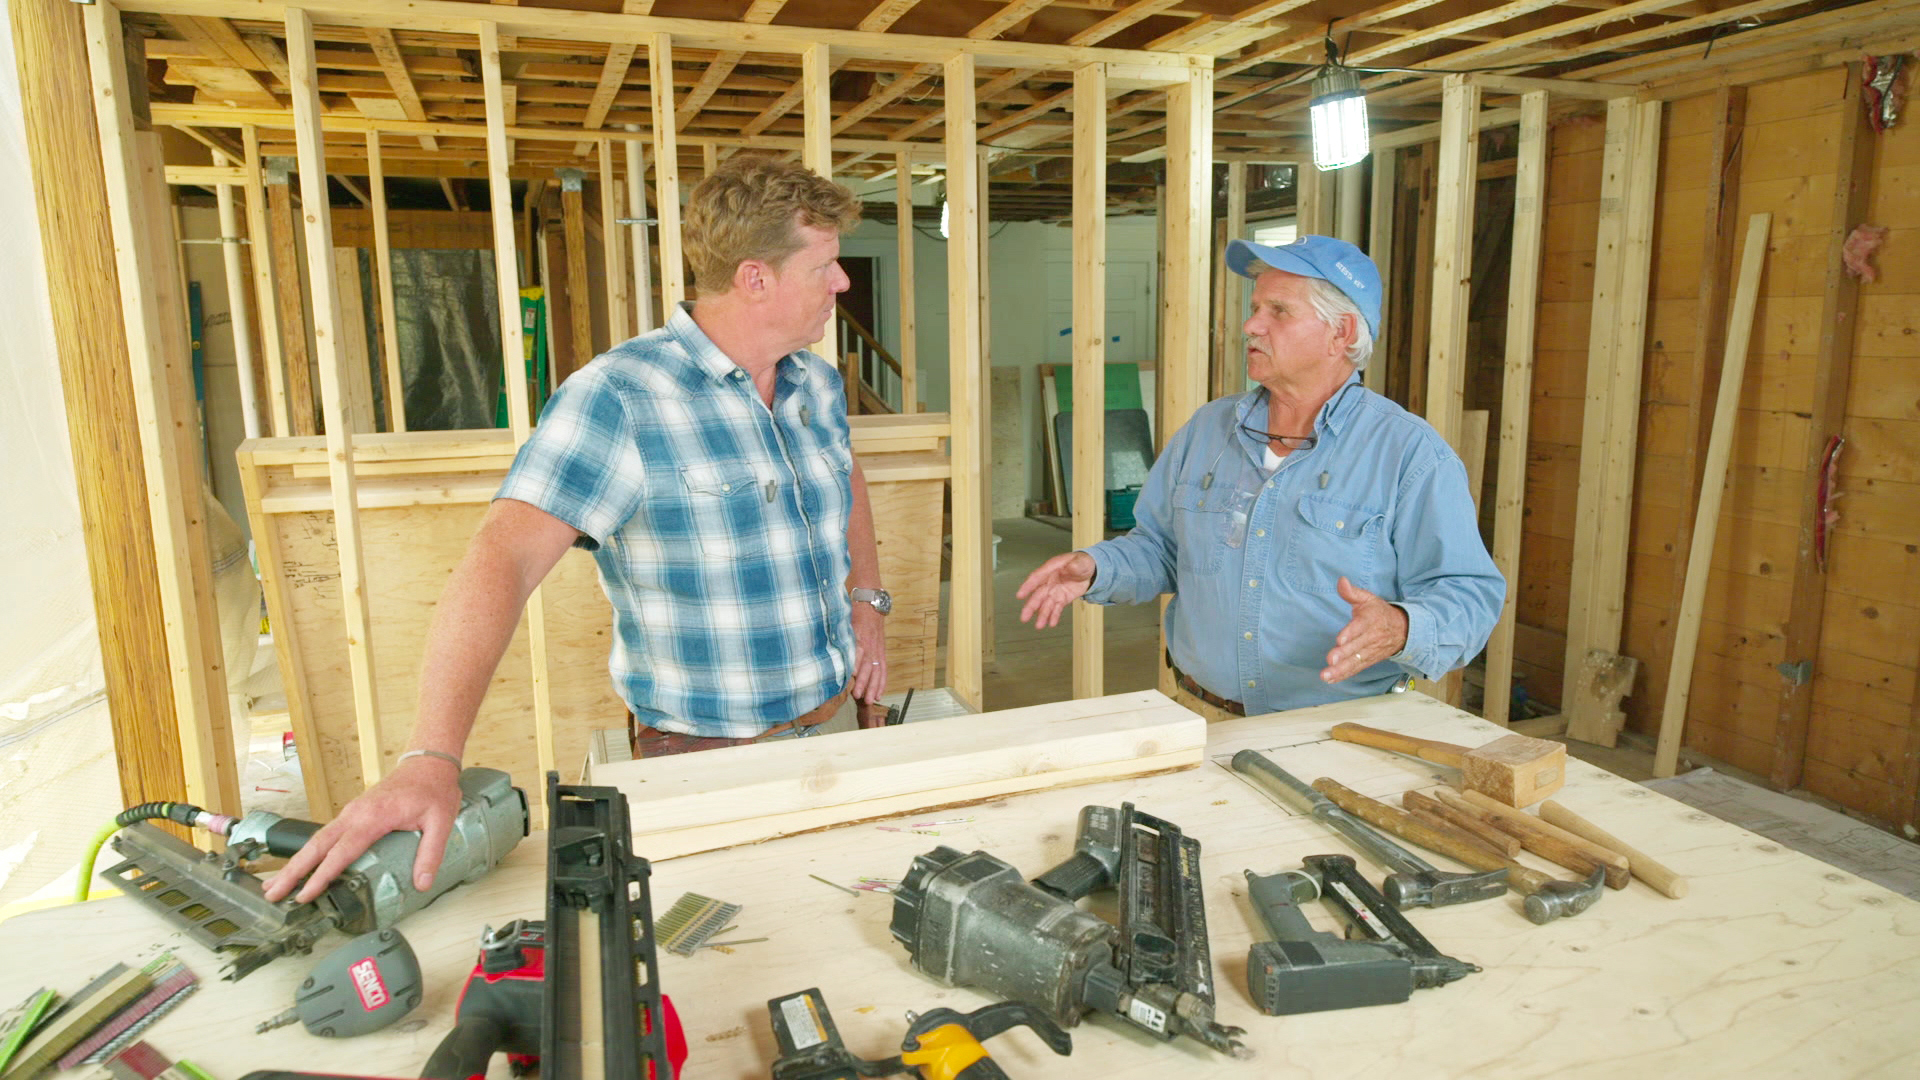 S43 E9, Tom Silva discusses framing tools with Kevin O’Connor